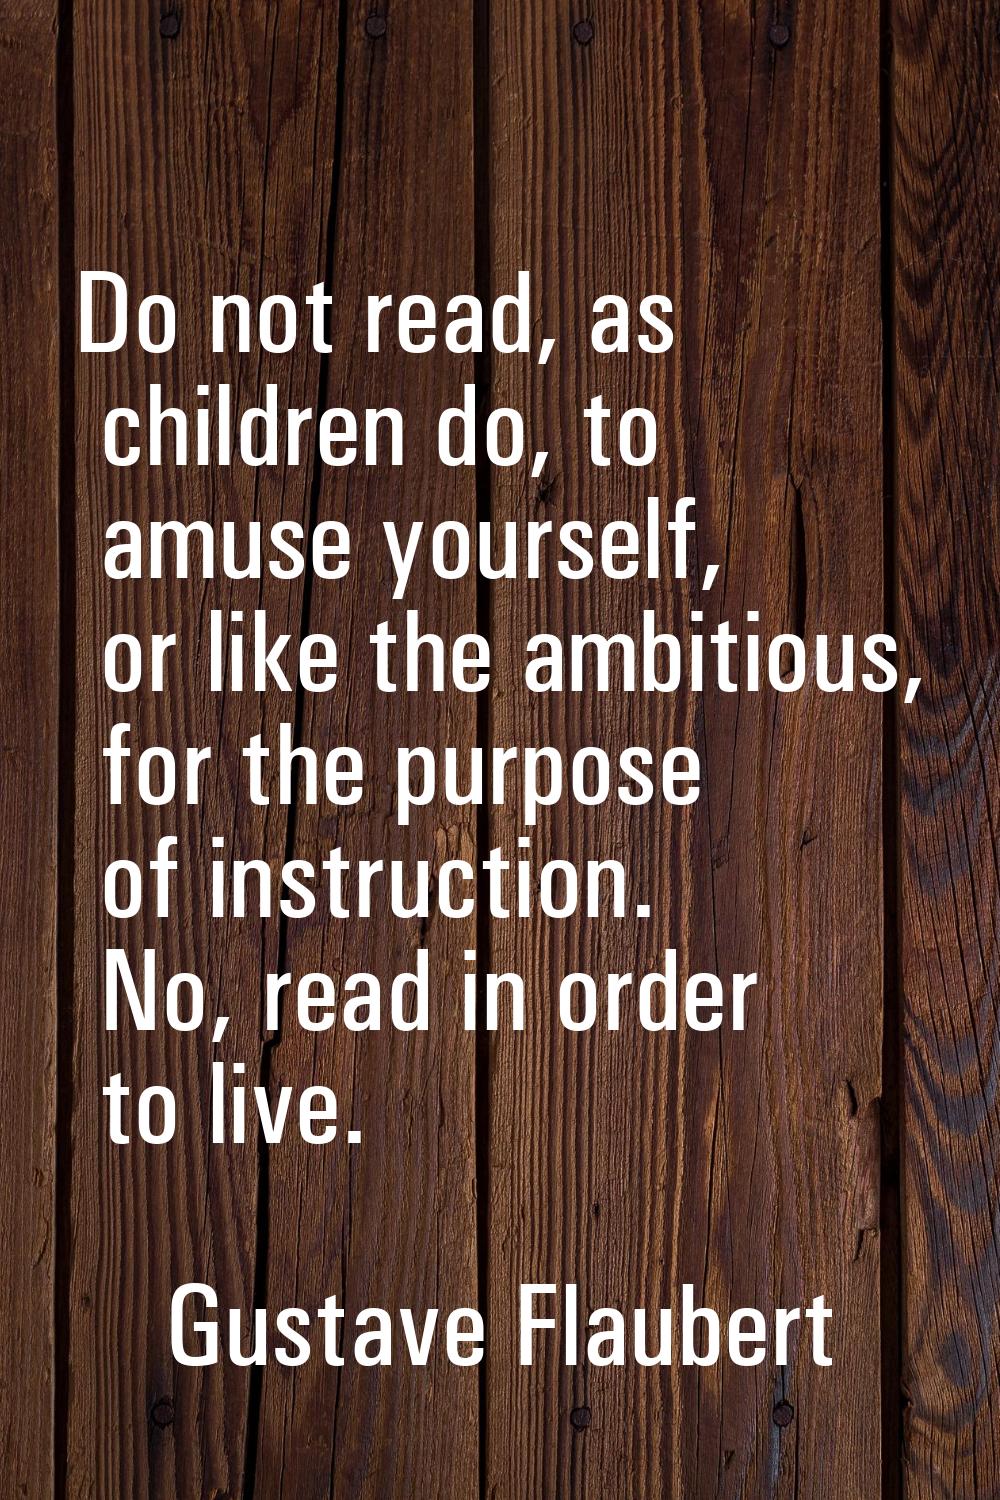 Do not read, as children do, to amuse yourself, or like the ambitious, for the purpose of instructi